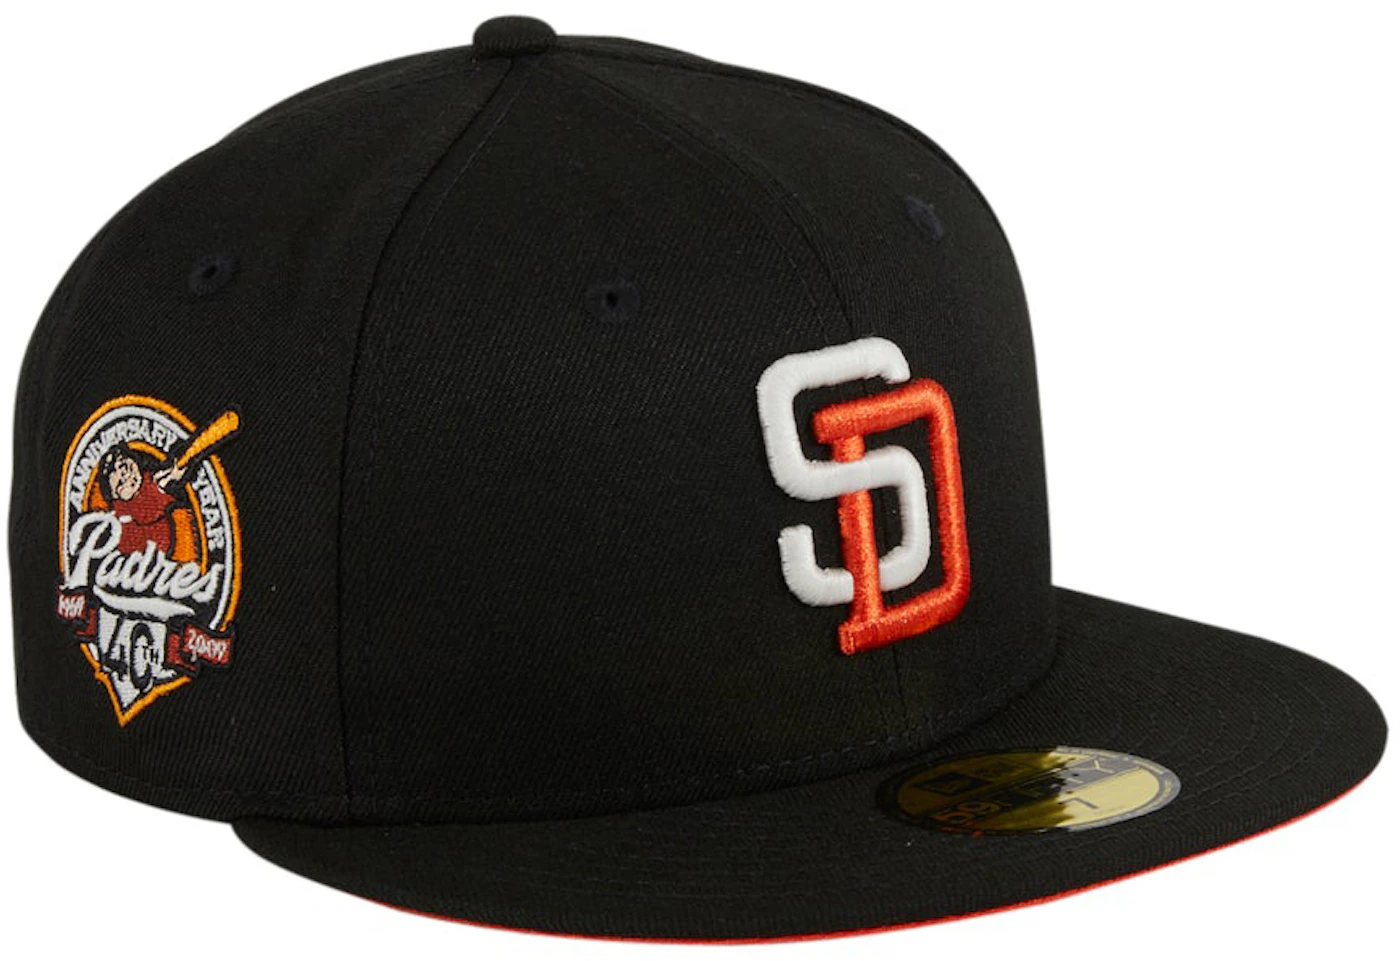 New Era San Diego Padres Retro City Two Tone Edition 59Fifty Fitted Hat, FITTED HATS, CAPS